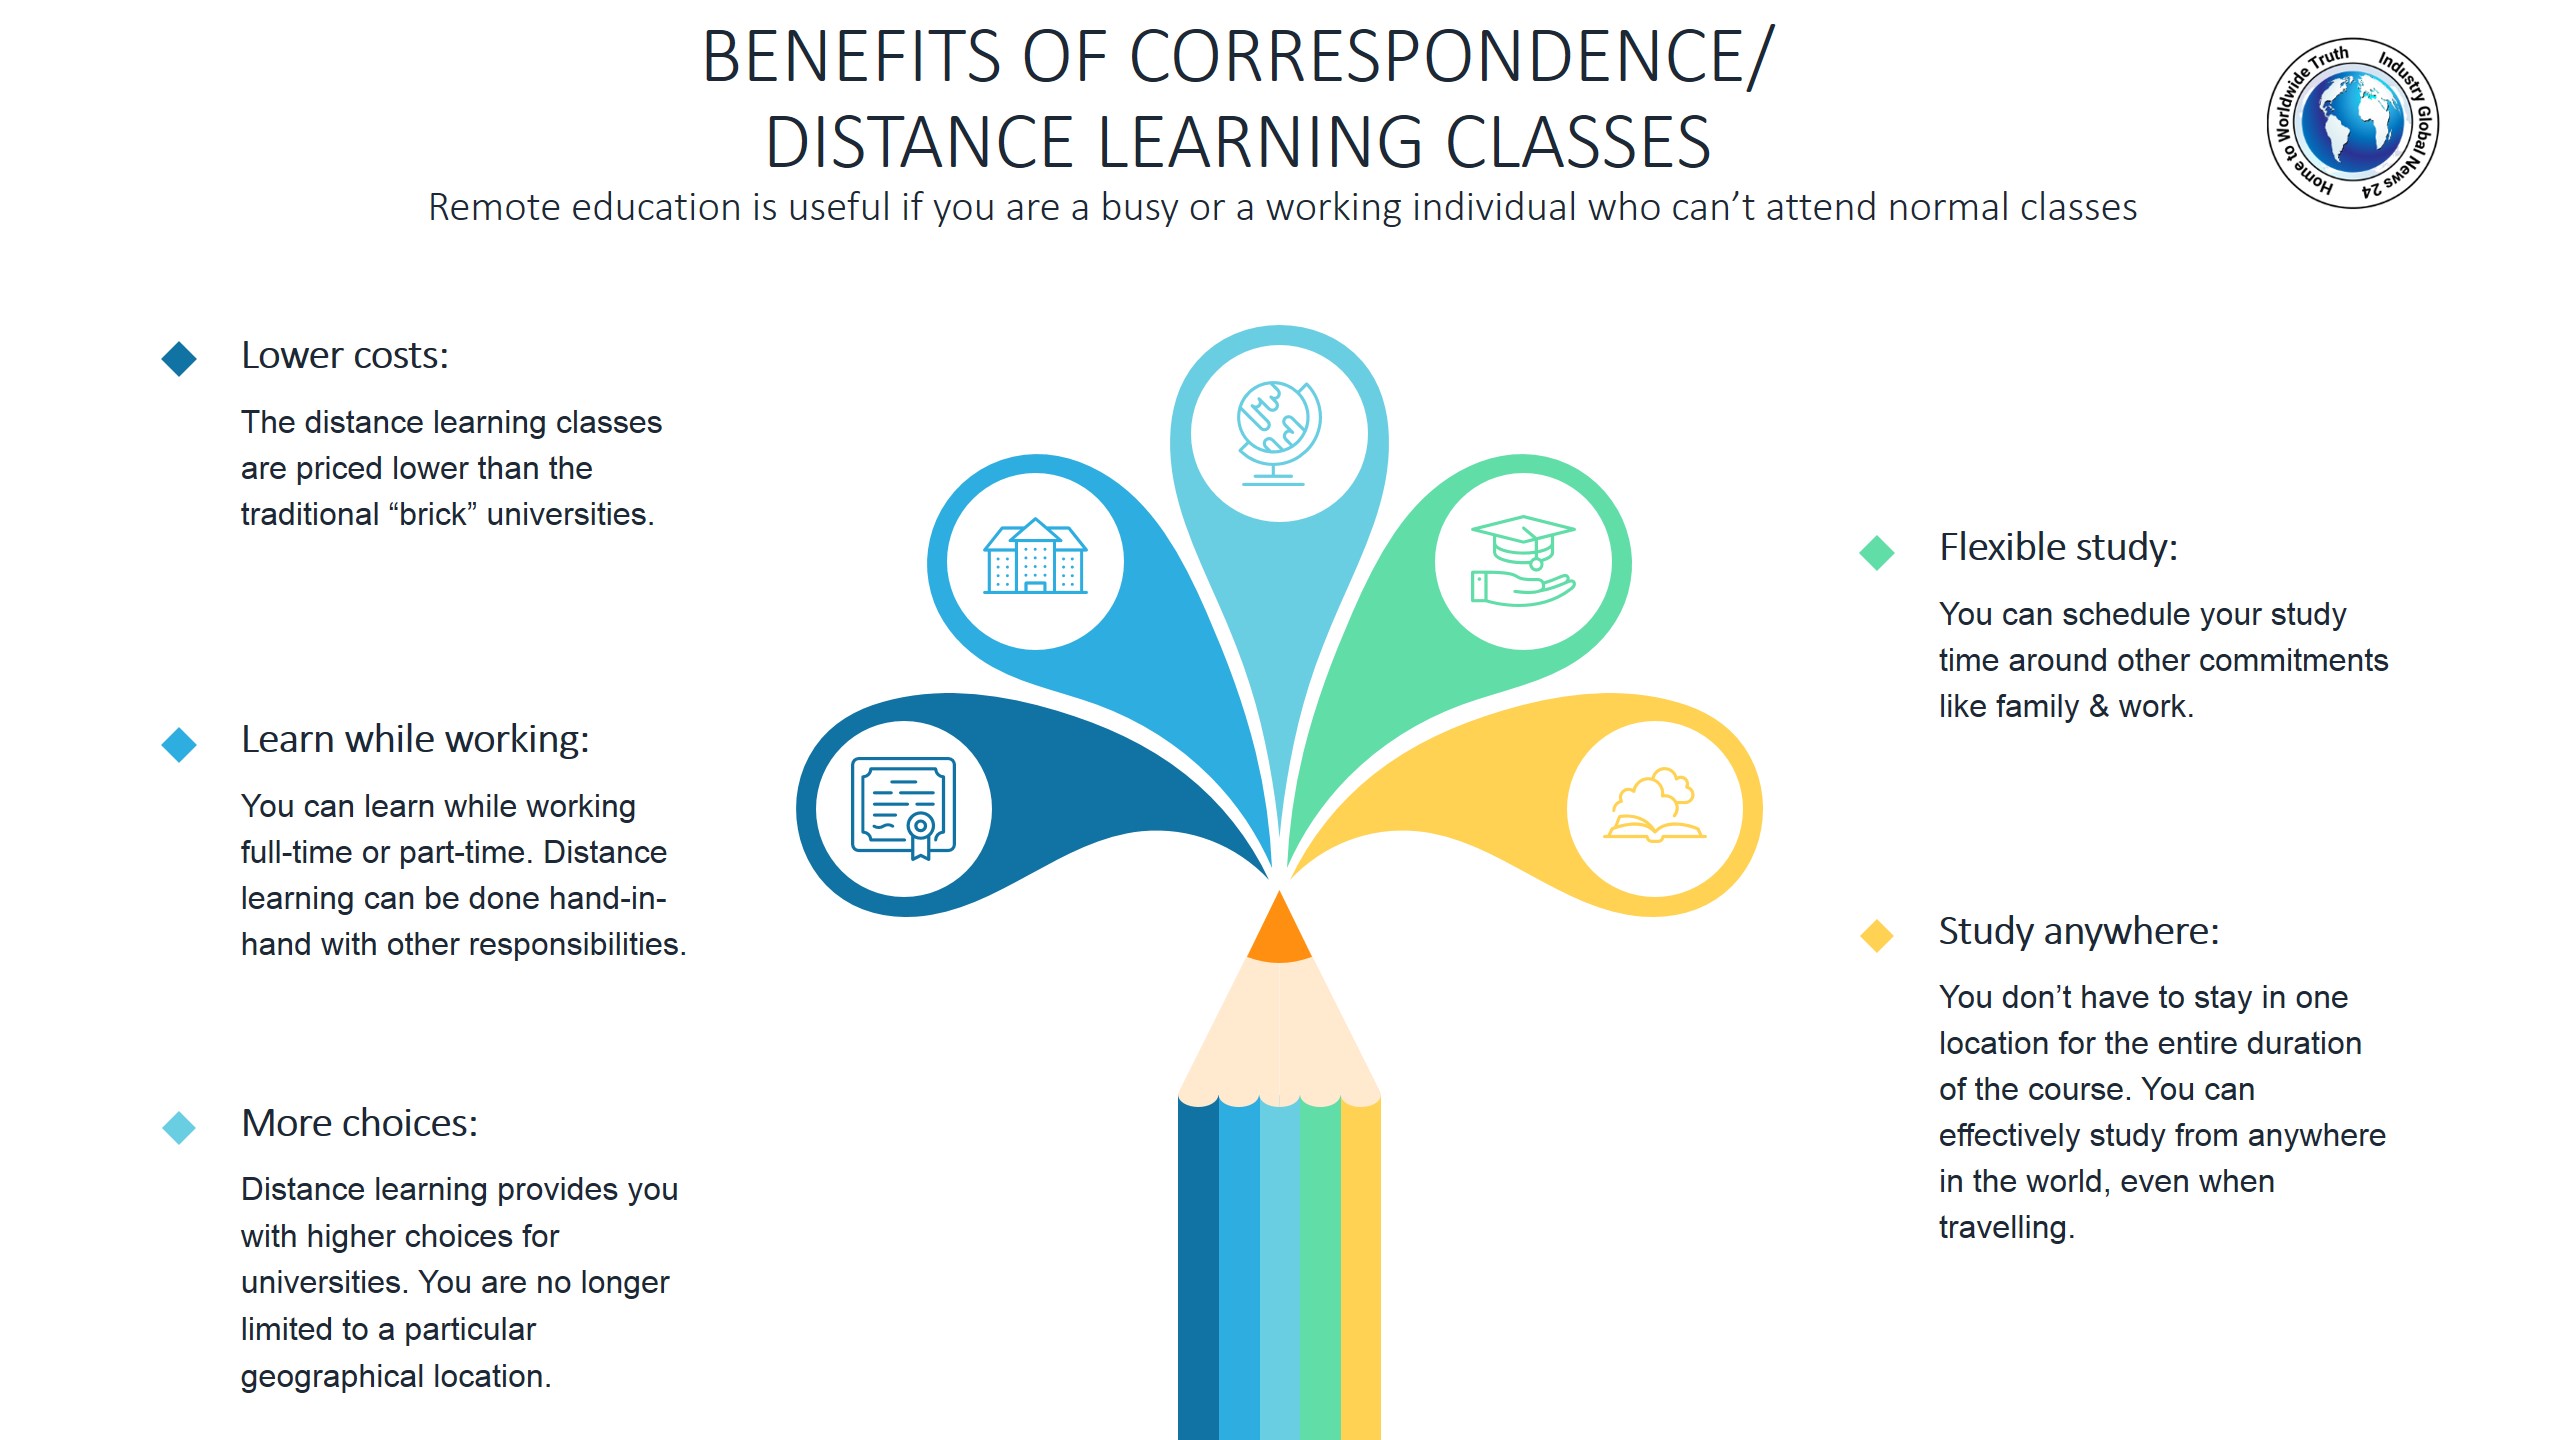 Benefits of correspondence distance learning classes